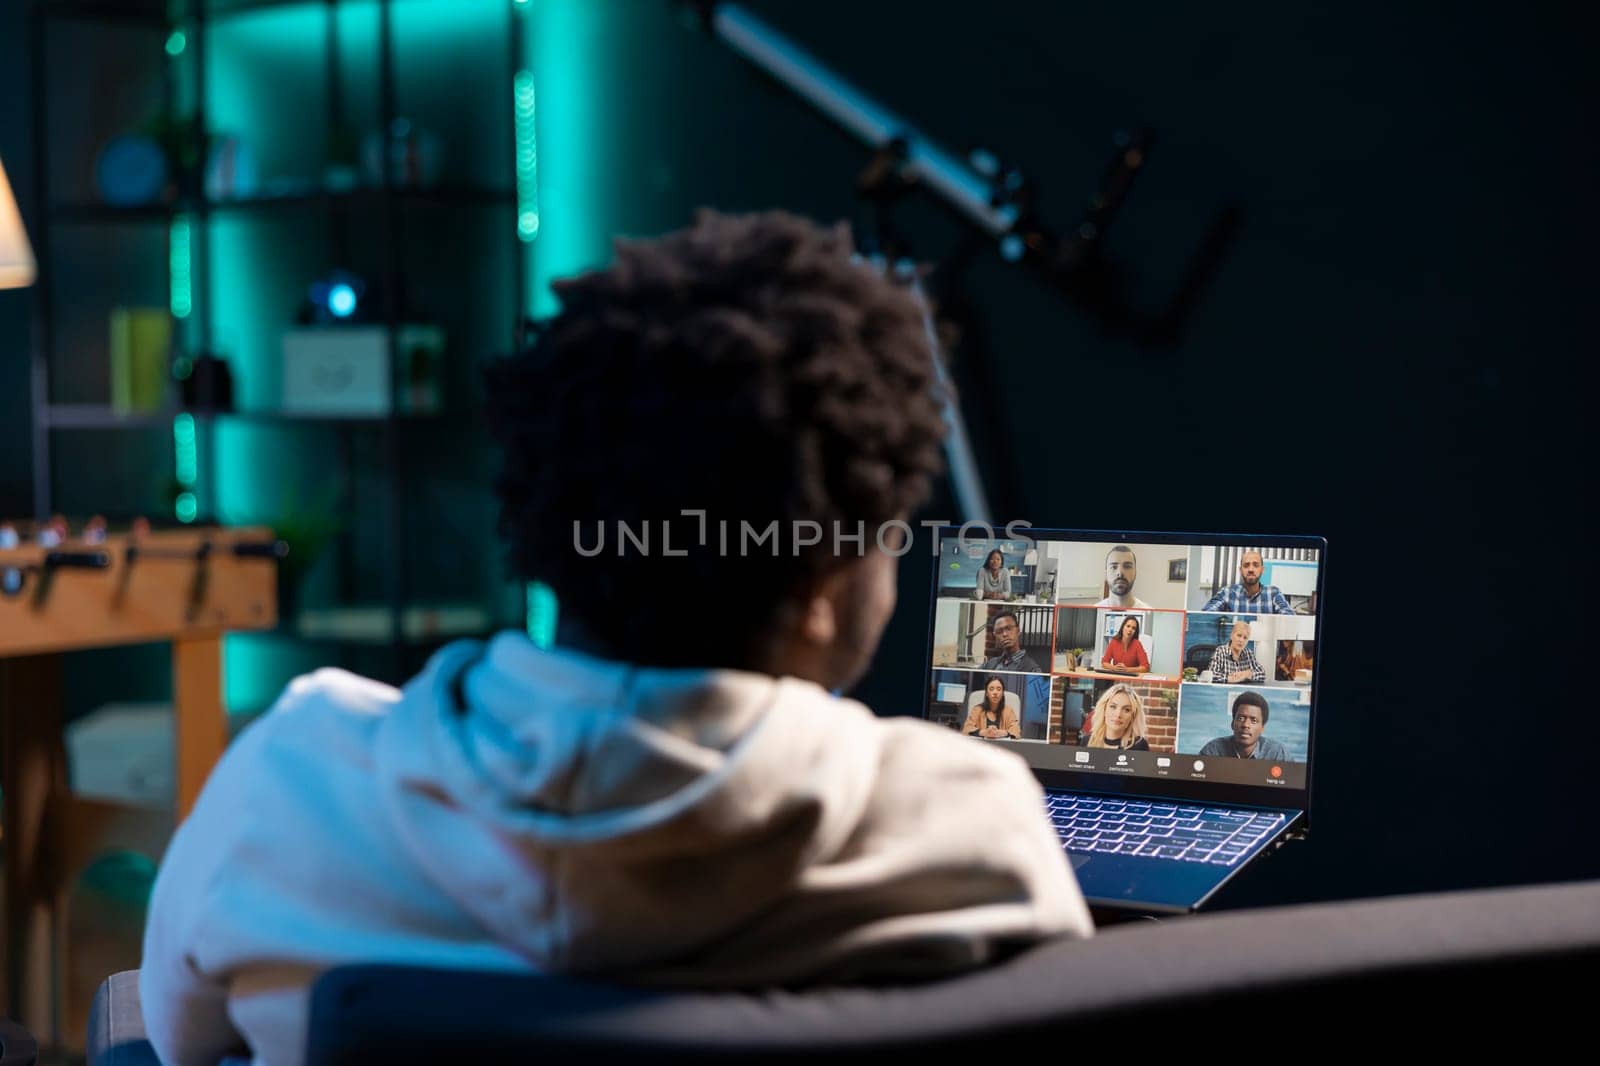 Manager teleworking in apartment, discussing with workers during video call by DCStudio